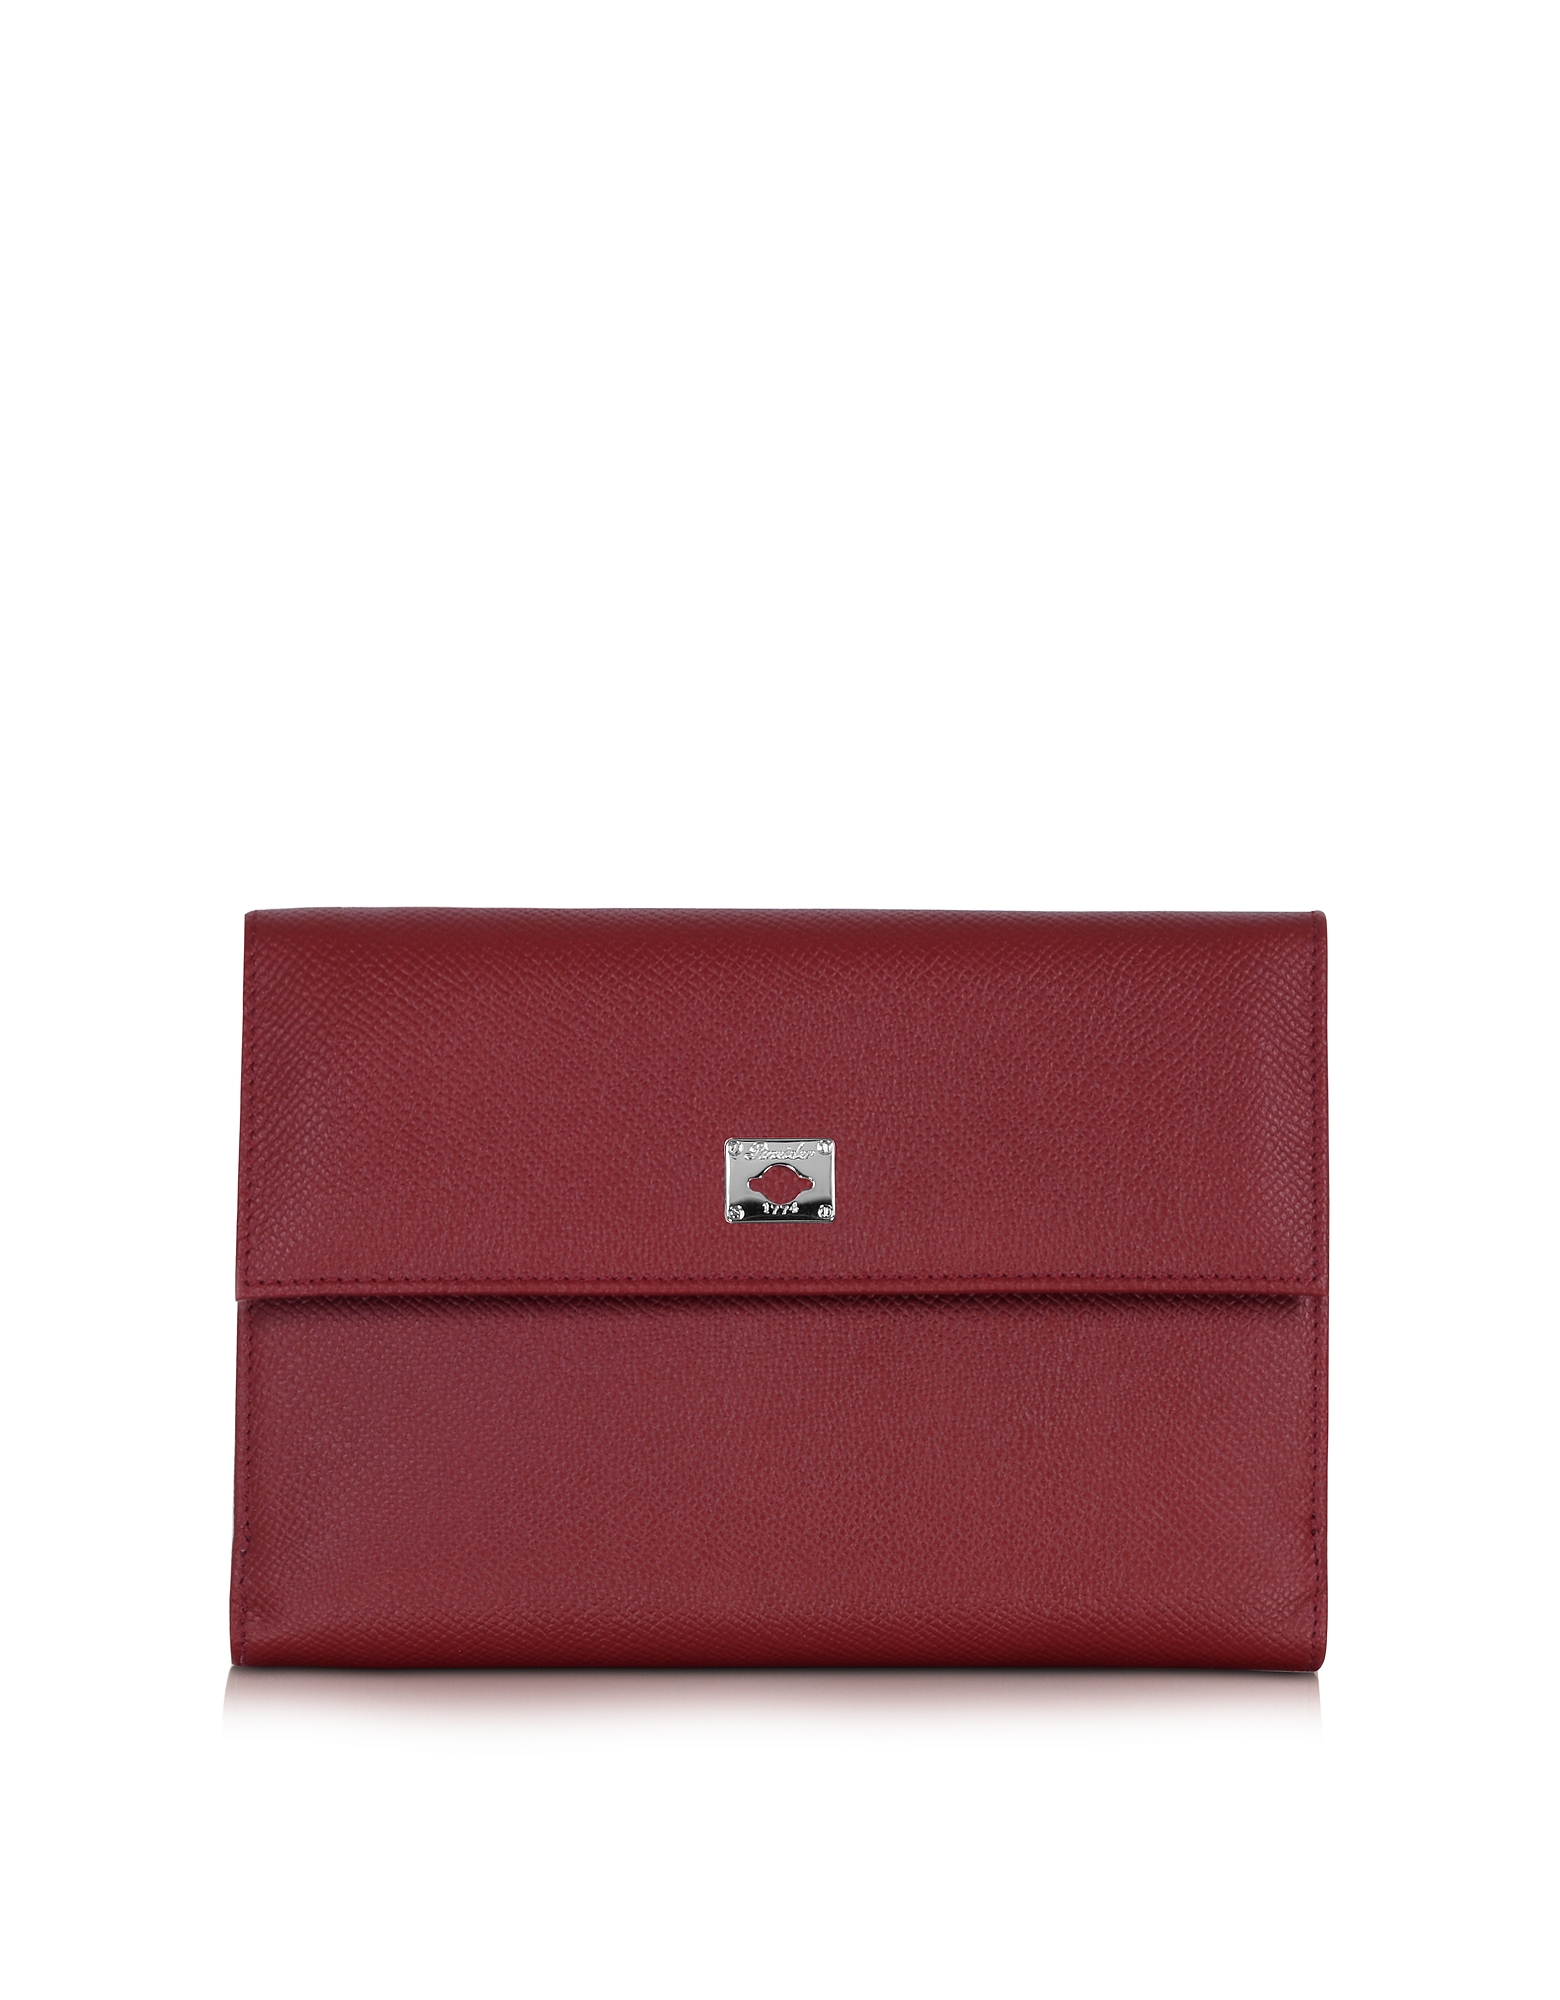 

City Chic Burgundy Leather French Purse Wallet